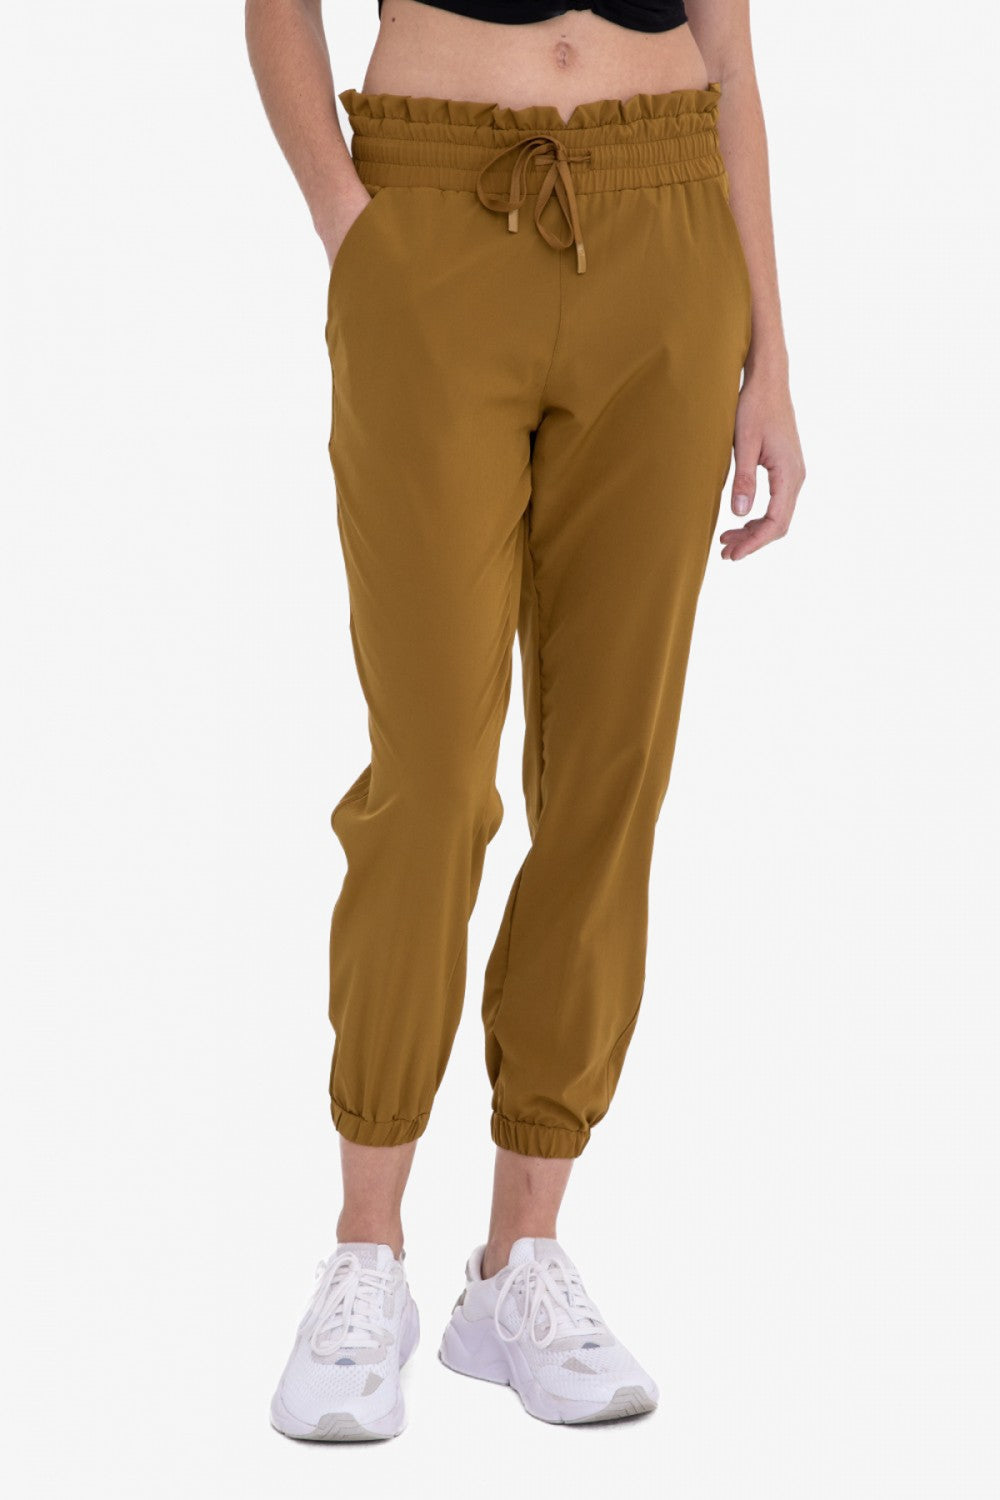 “Coolest" Joggers Around- Mustard Olive